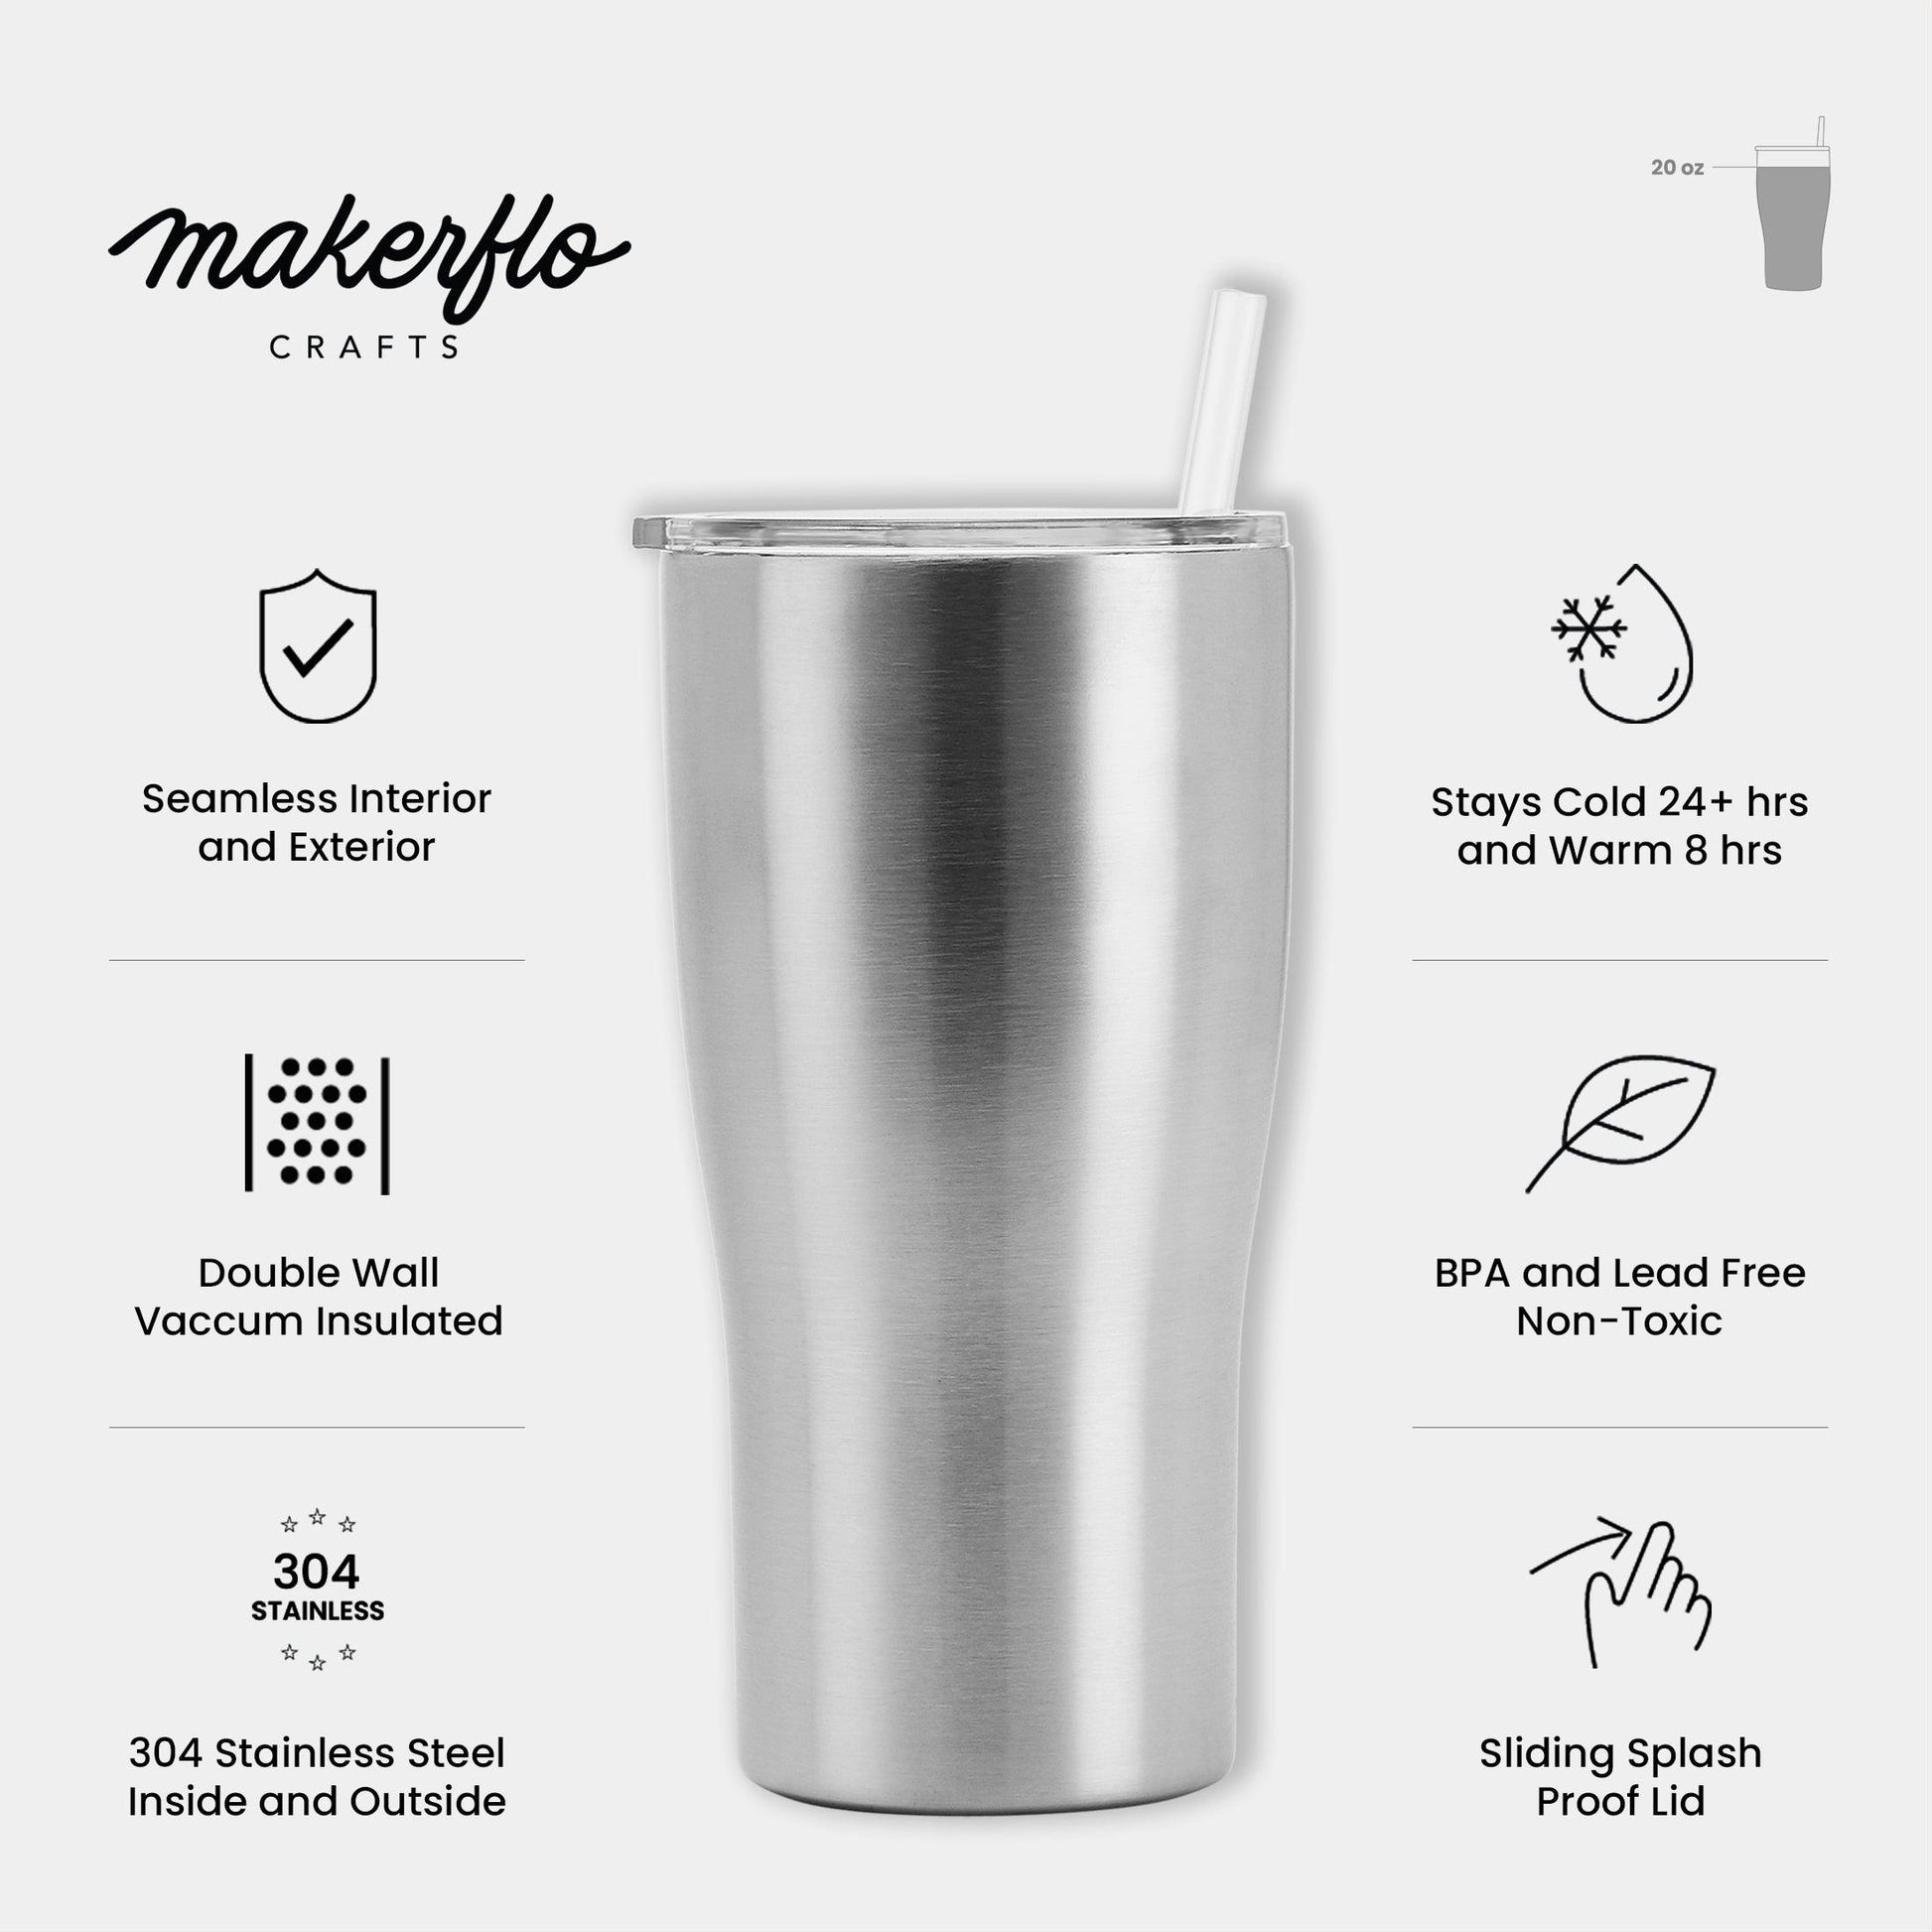 MakerFlo Crafts Tapered Tumbler, Stainless Steel, Case of 25, 32oz